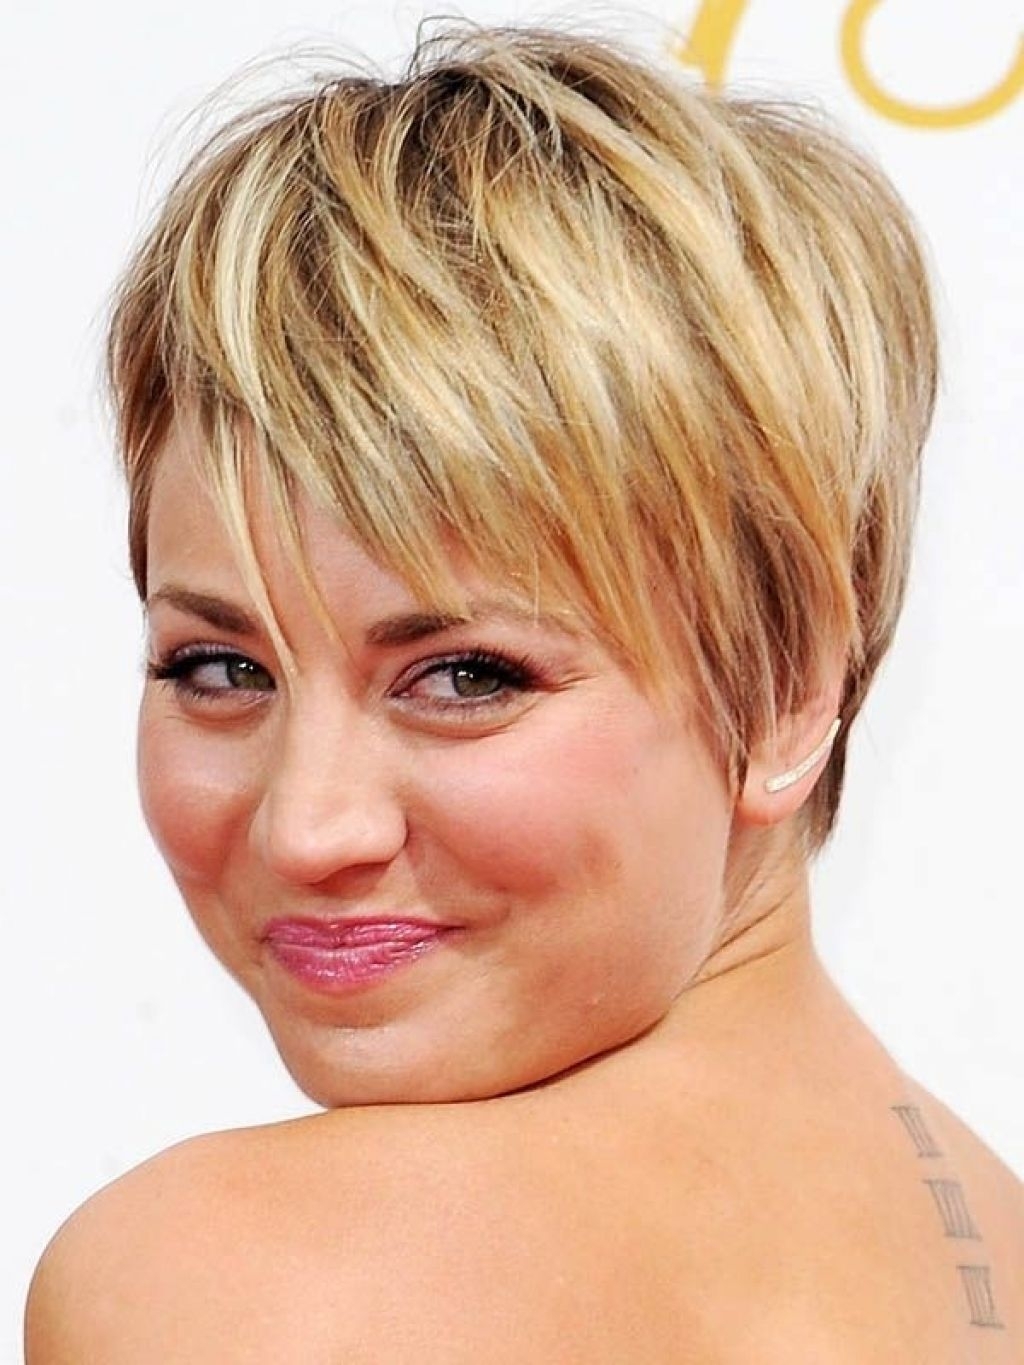 Short Hairstyles For Thin Hair Fat Face